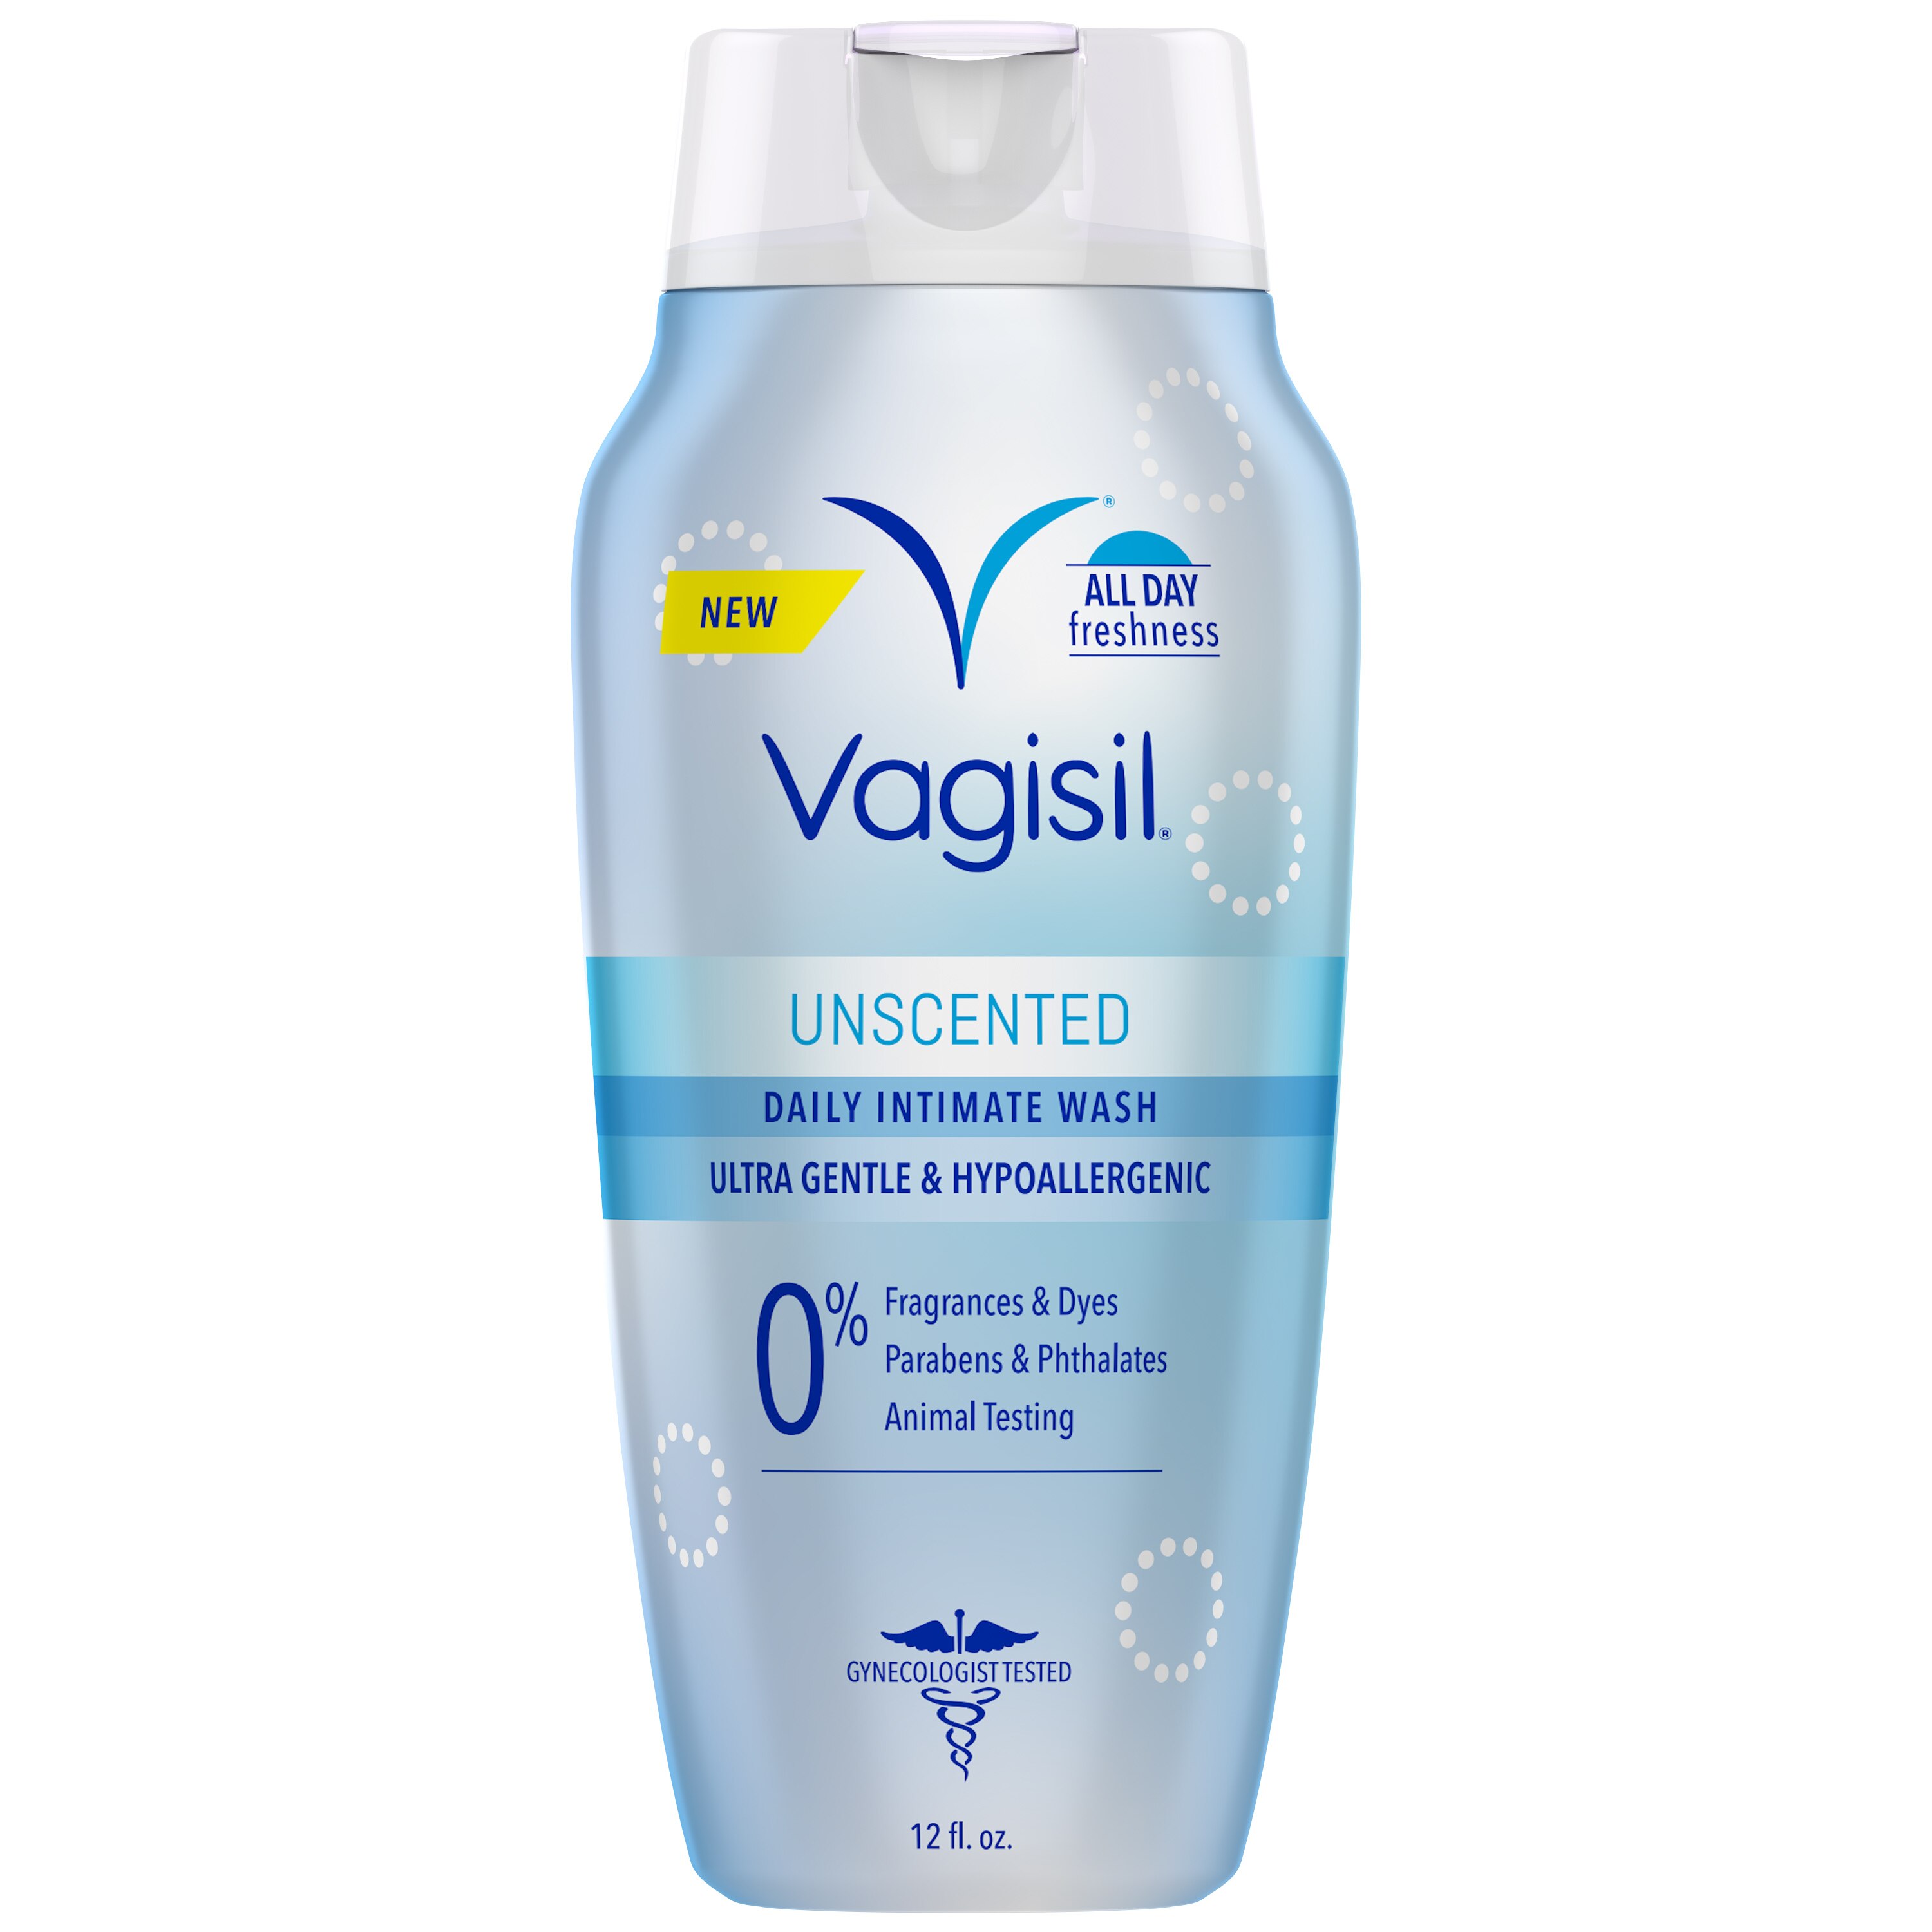 Vagisil Unscented Daily Intimate Wash, 12oz